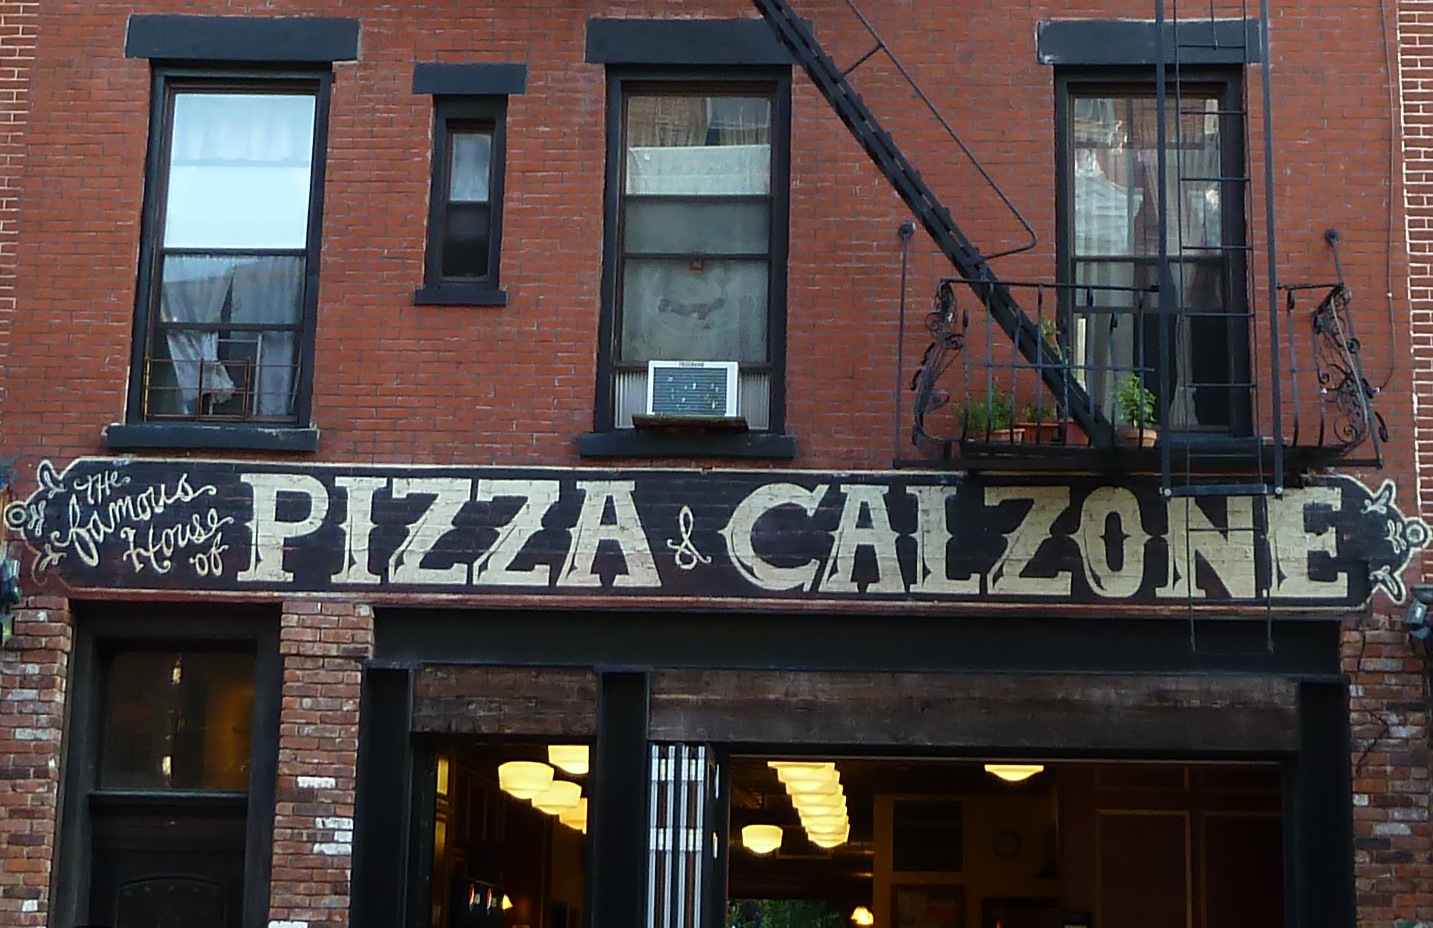 the large sign on the building says pizza & calzonee